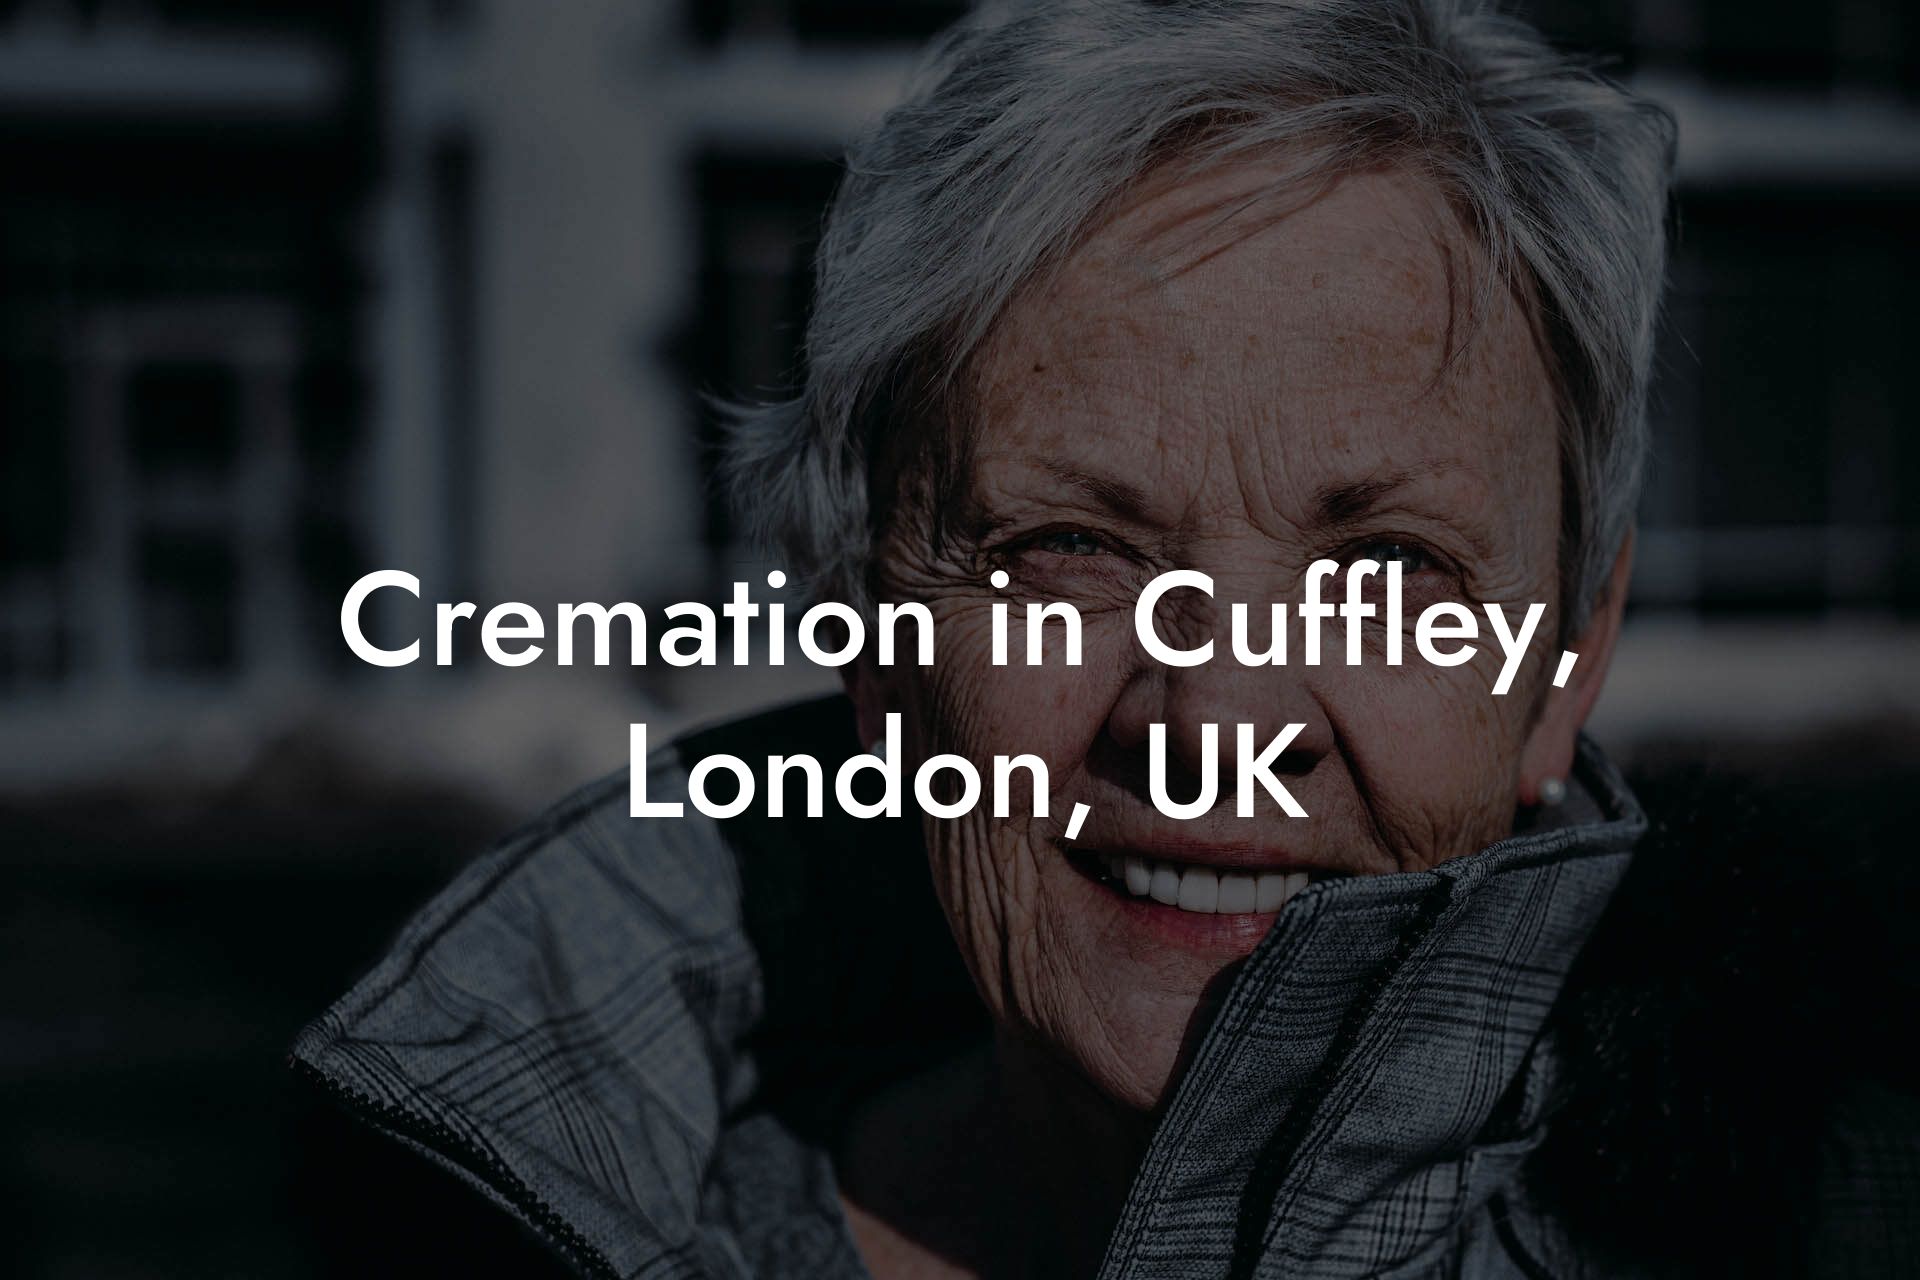 Cremation in Cuffley, London, UK